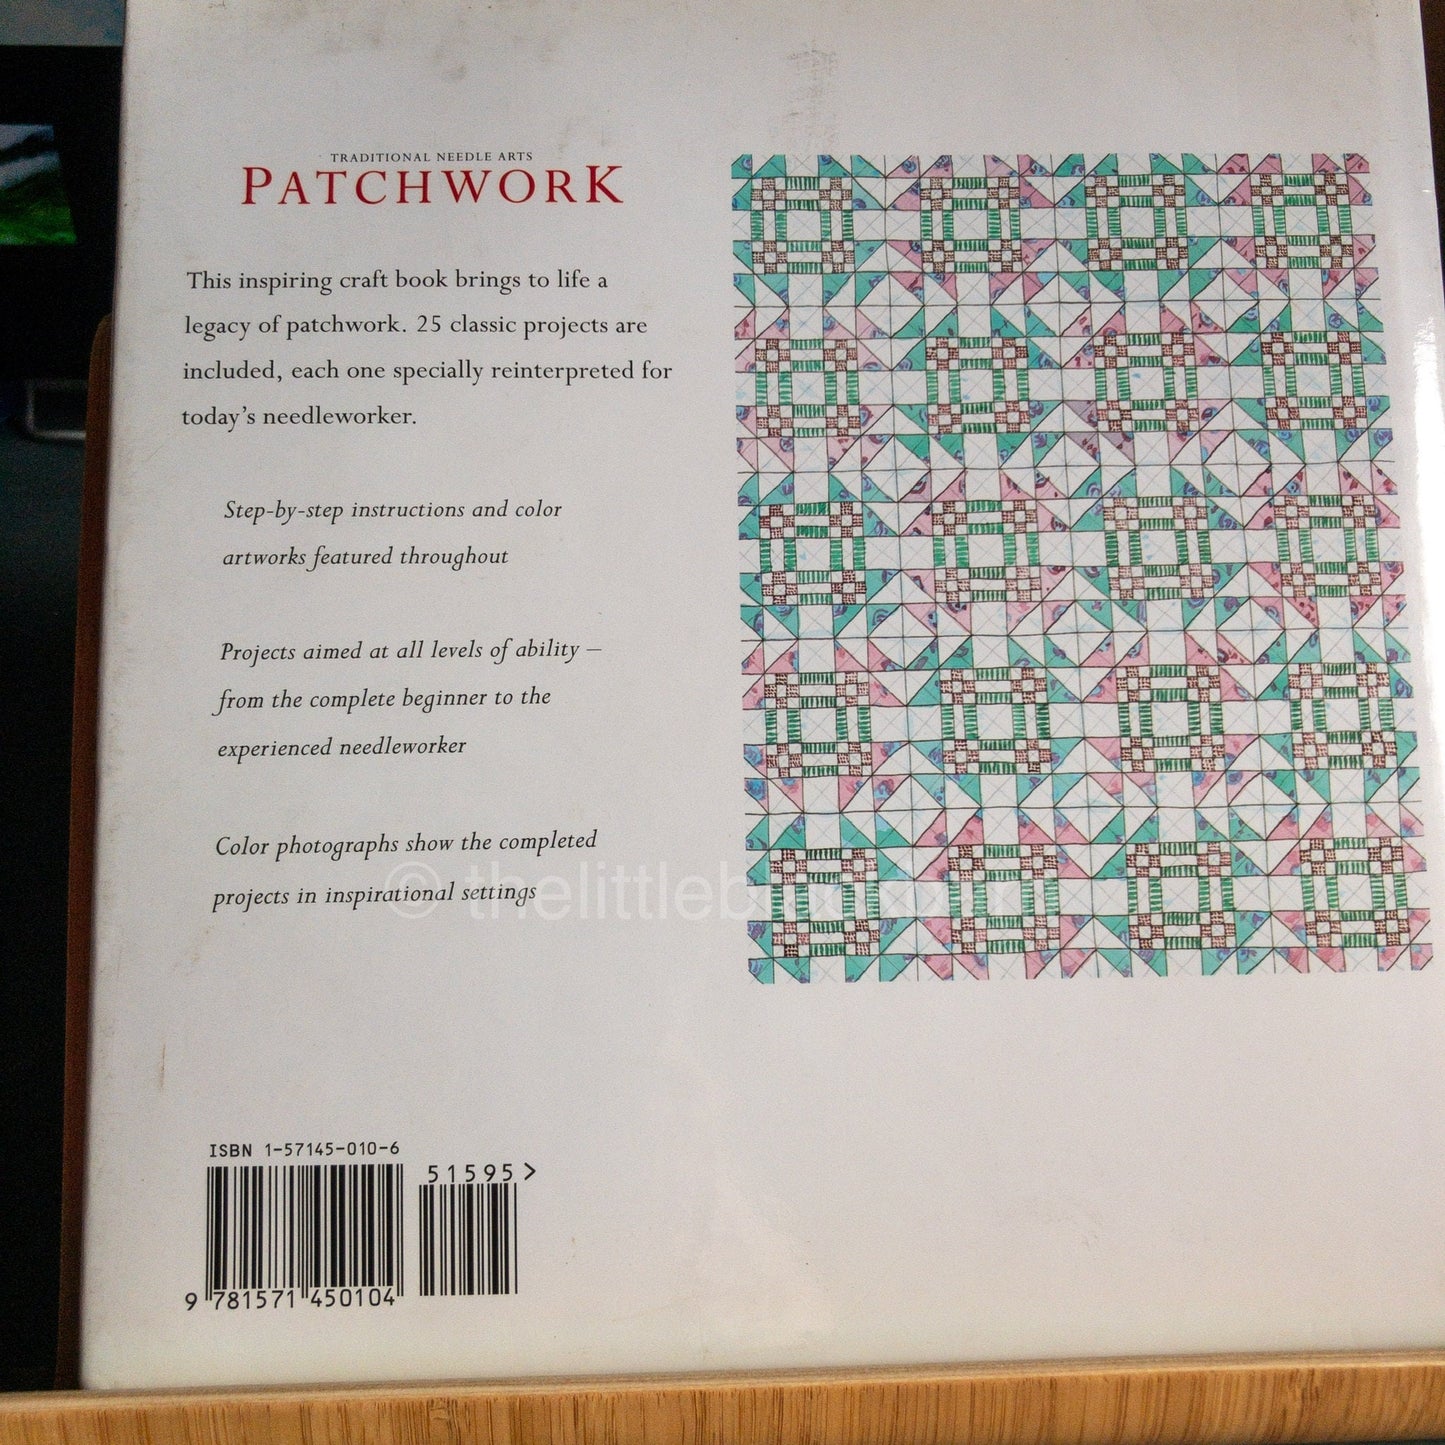 Traditional Needle Arts, Patchwork, by Diana Lodge, 25 Projects, Vintage 1994 Hardcover Book